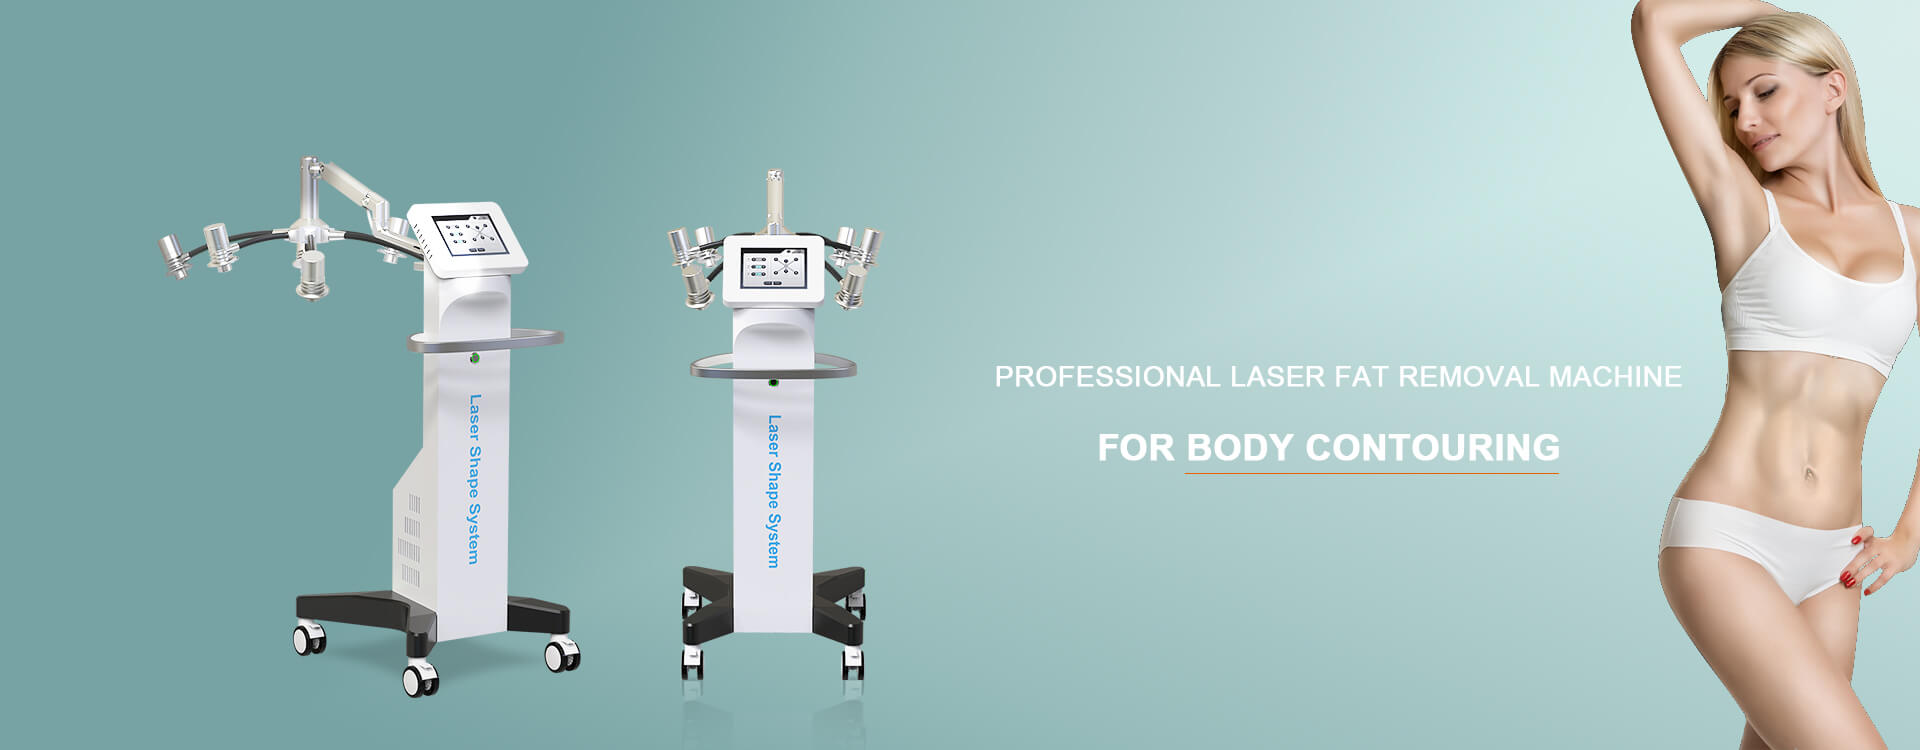 2022 Weight Loss Equipment Non Invasive Body Shaping Lipo Laser 532nm Green  Lights 6d Laser Device Cold Laser From Amazingbeautymachine, $4,975.13